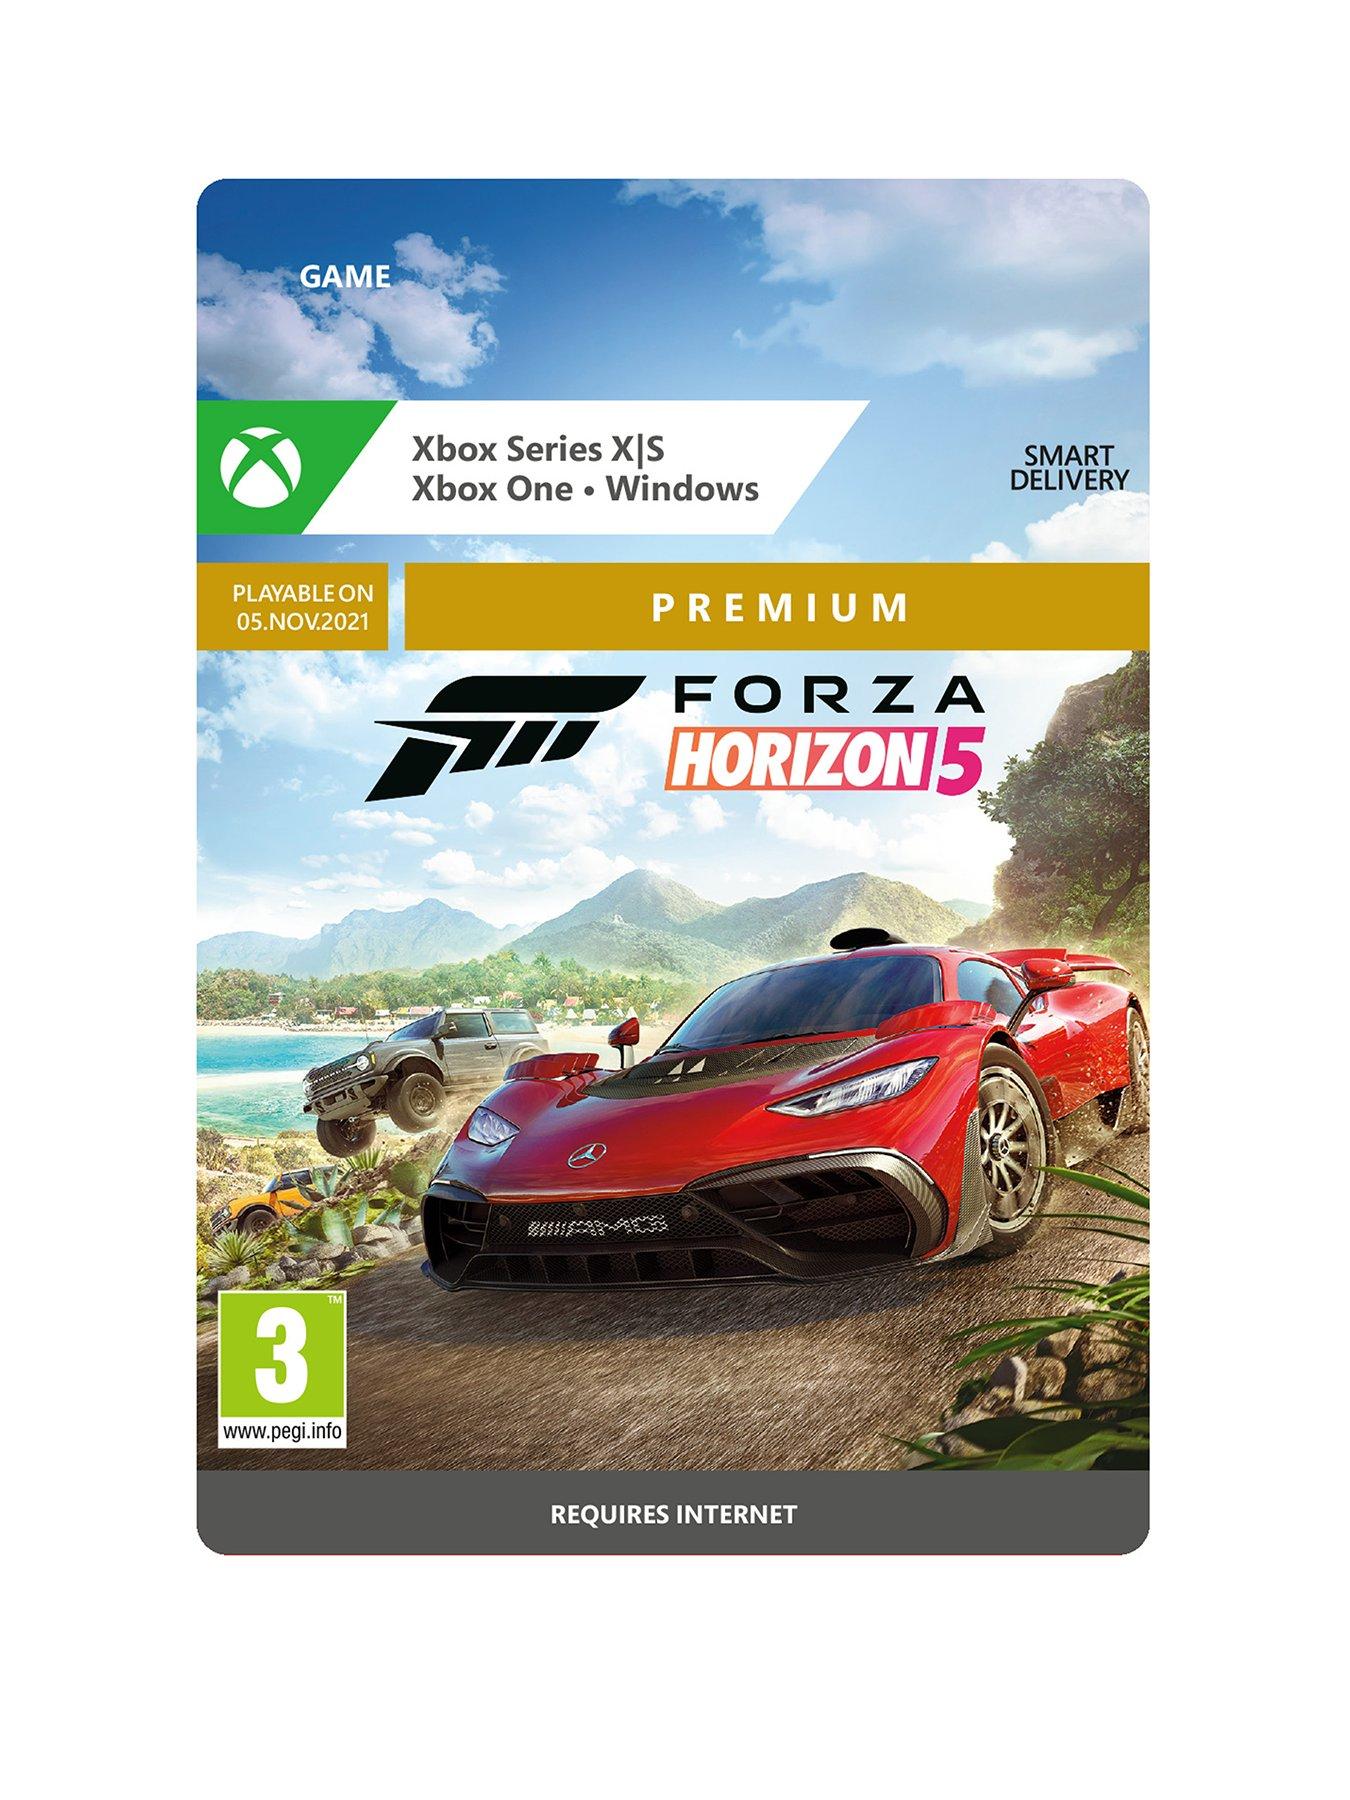 Dominate the racetrack in Forza Motorsport 6 now free on Xbox One via Games  With Gold